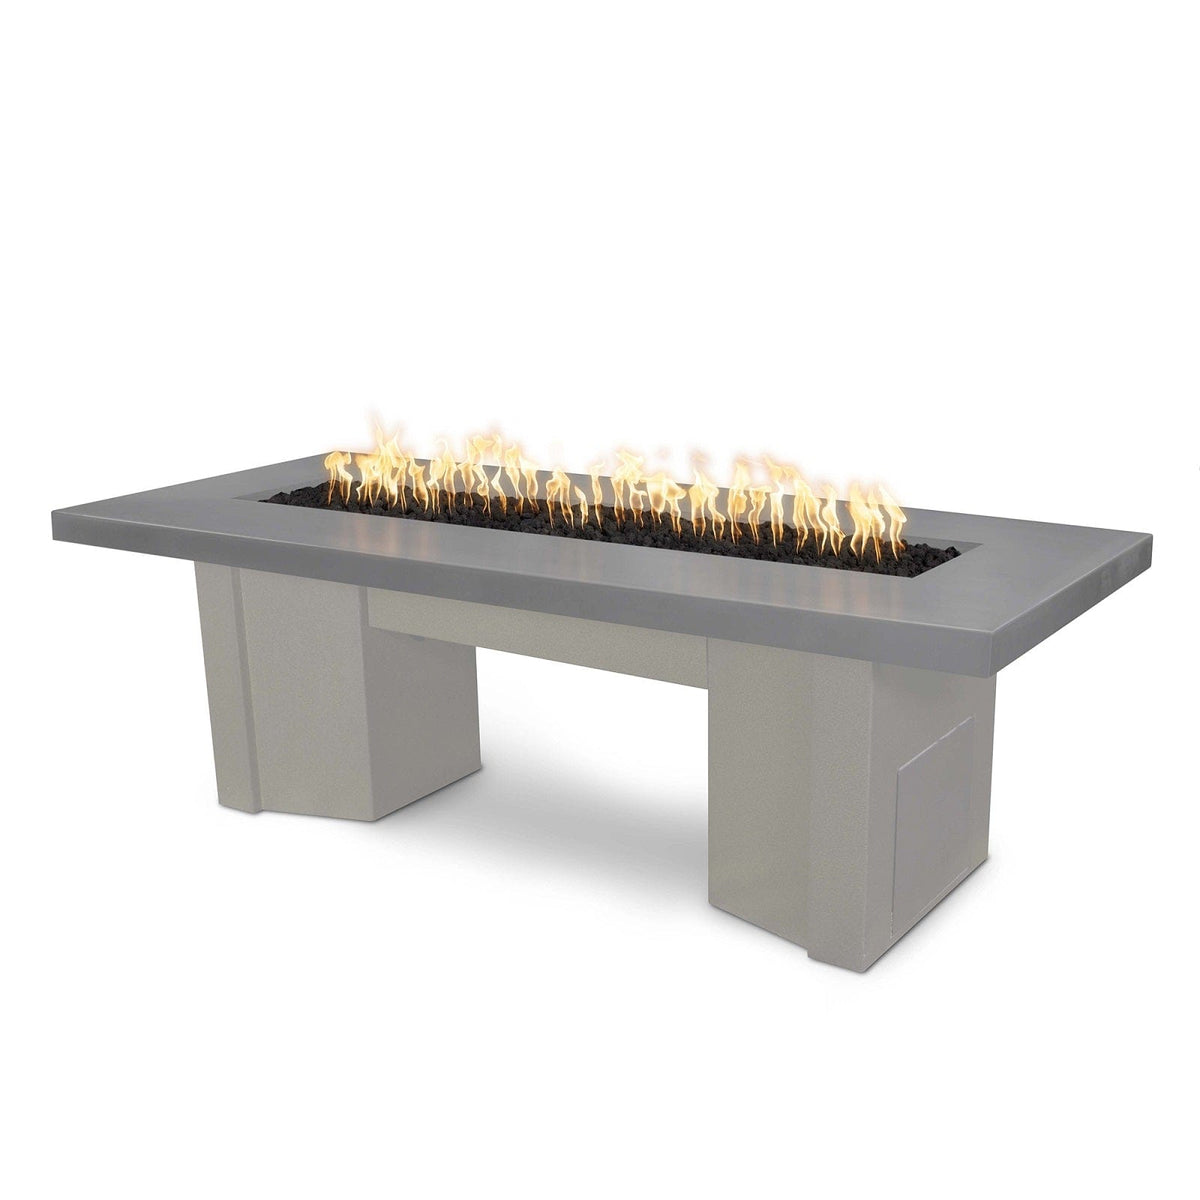 The Outdoor Plus Fire Features Natural Gray (-NGY) / Pewter Powder Coated Steel (-PEW) The Outdoor Plus 60&quot; Alameda Fire Table Smooth Concrete in Liquid Propane - Match Lit / OPT-ALMGFRC60-LP